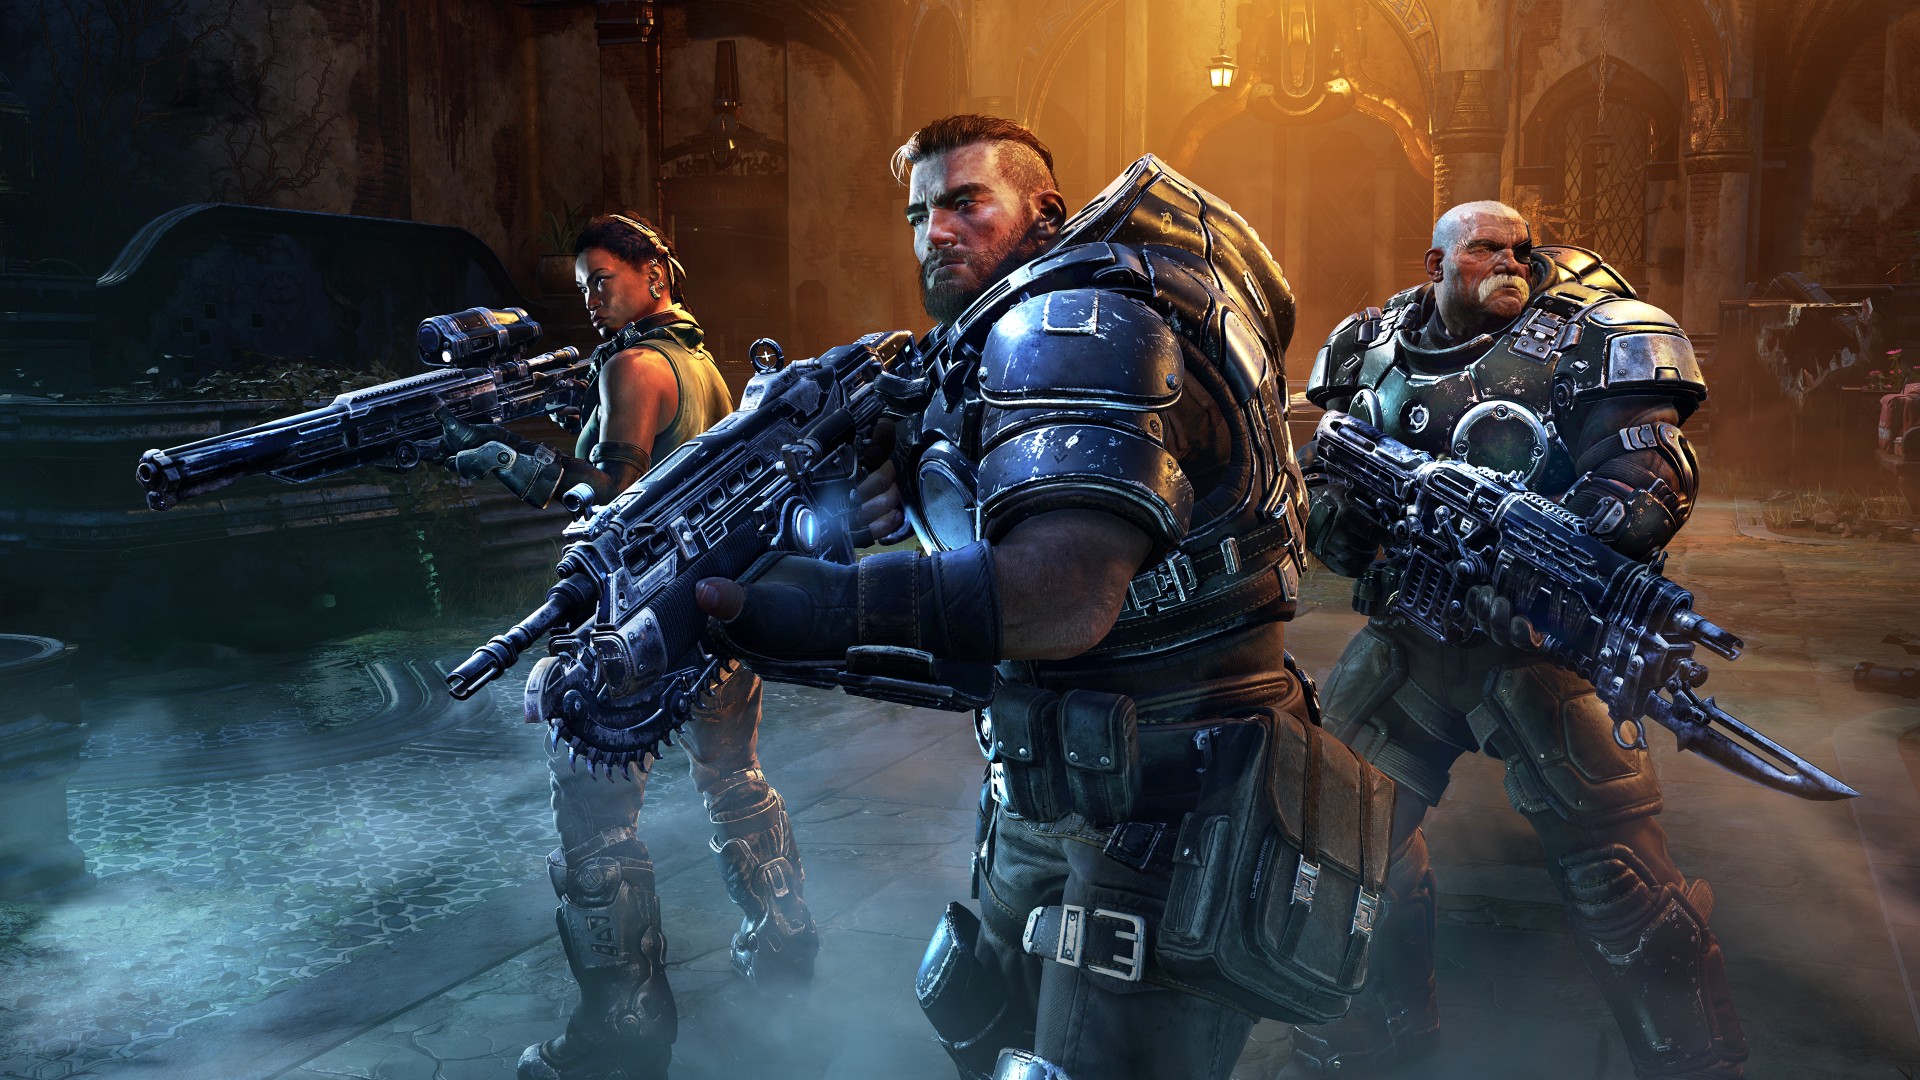 All Gears of War games released so far - check prices & availability